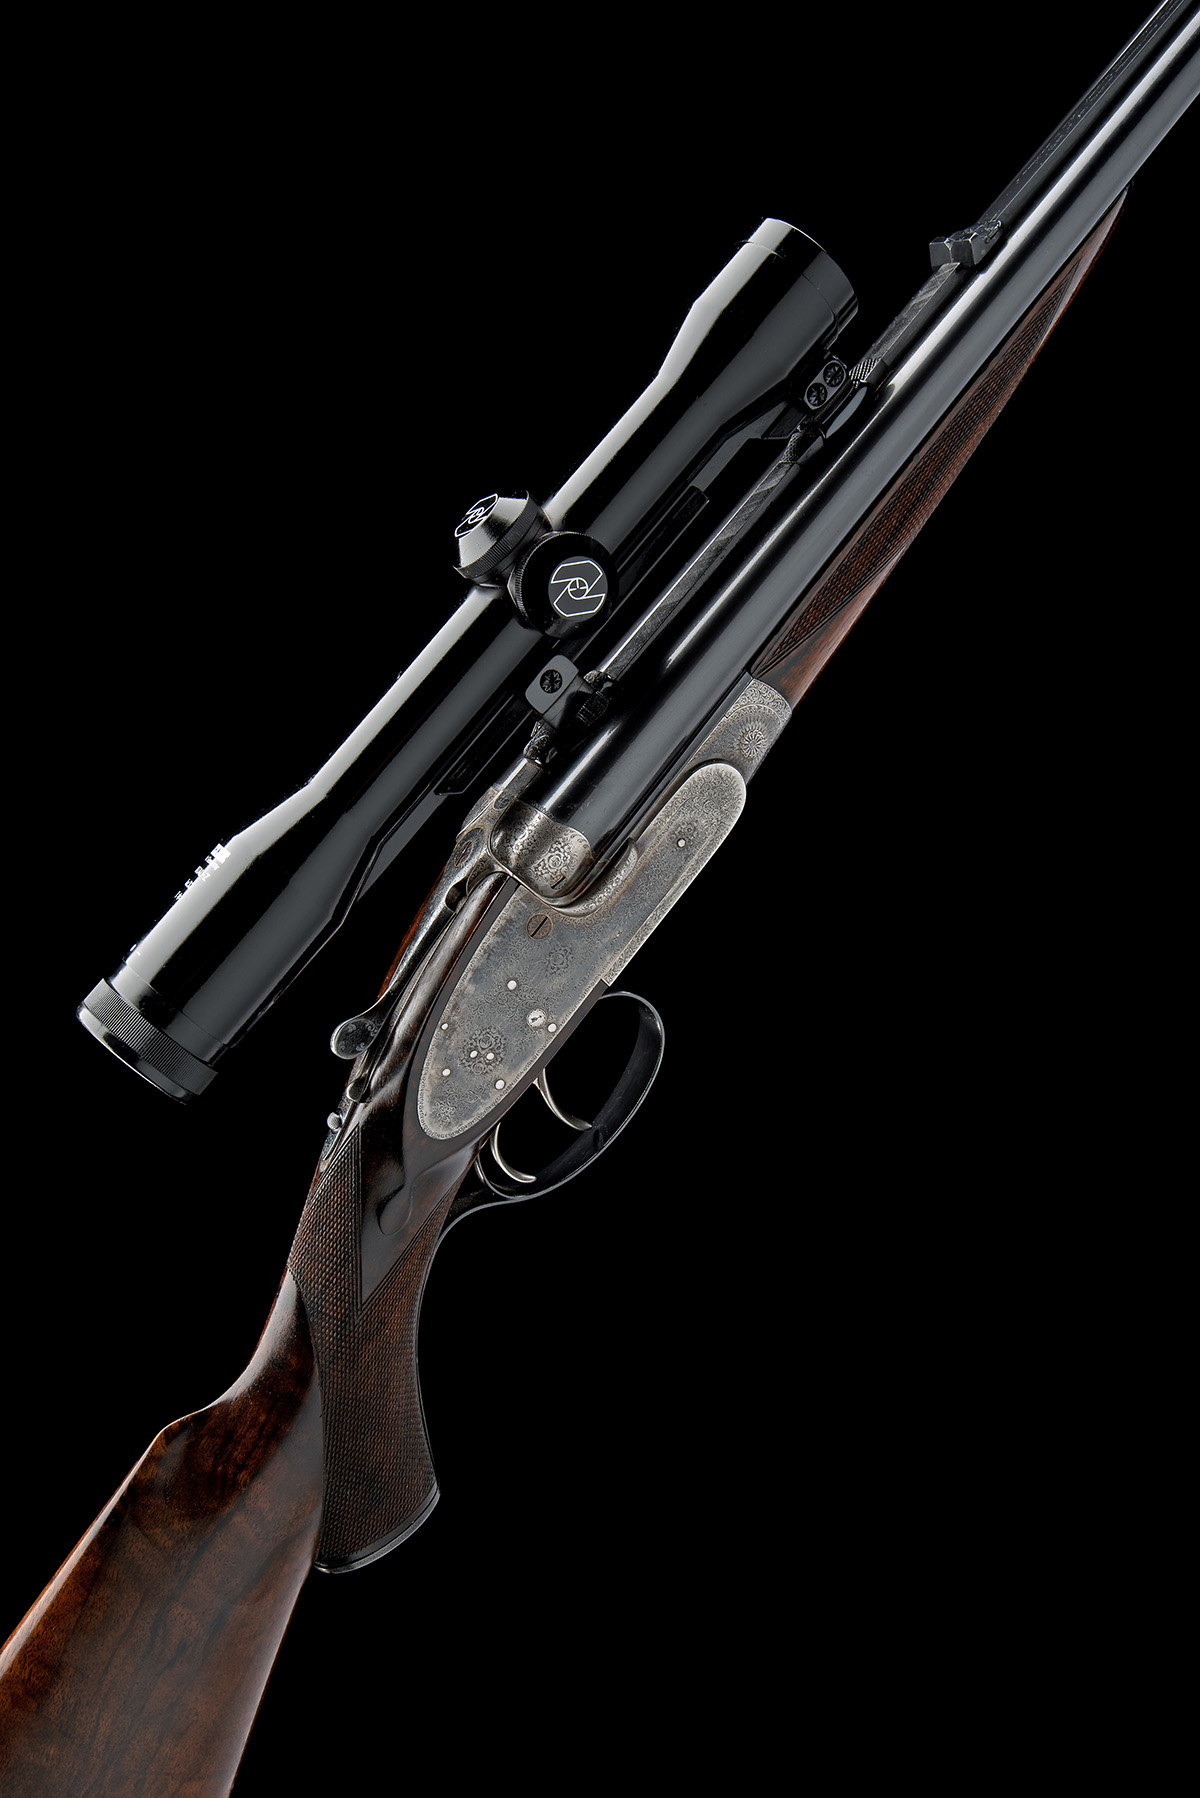 J. PURDEY & SONS A .303 NITRO EXPRESS SELF-OPENING SIDELOCK EJECTOR DOUBLE RIFLE, serial no. - Image 13 of 23